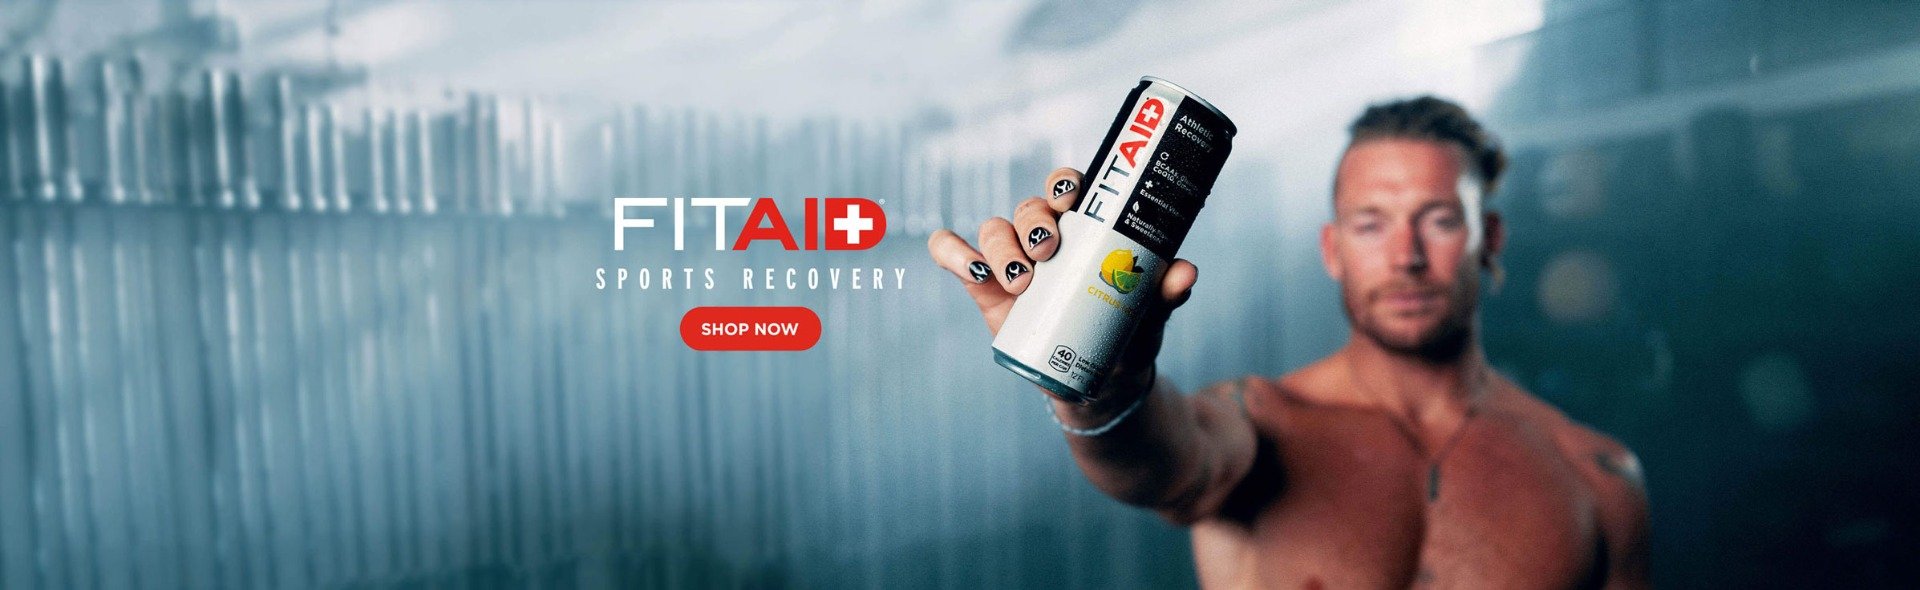 FITAID Sports Recovery